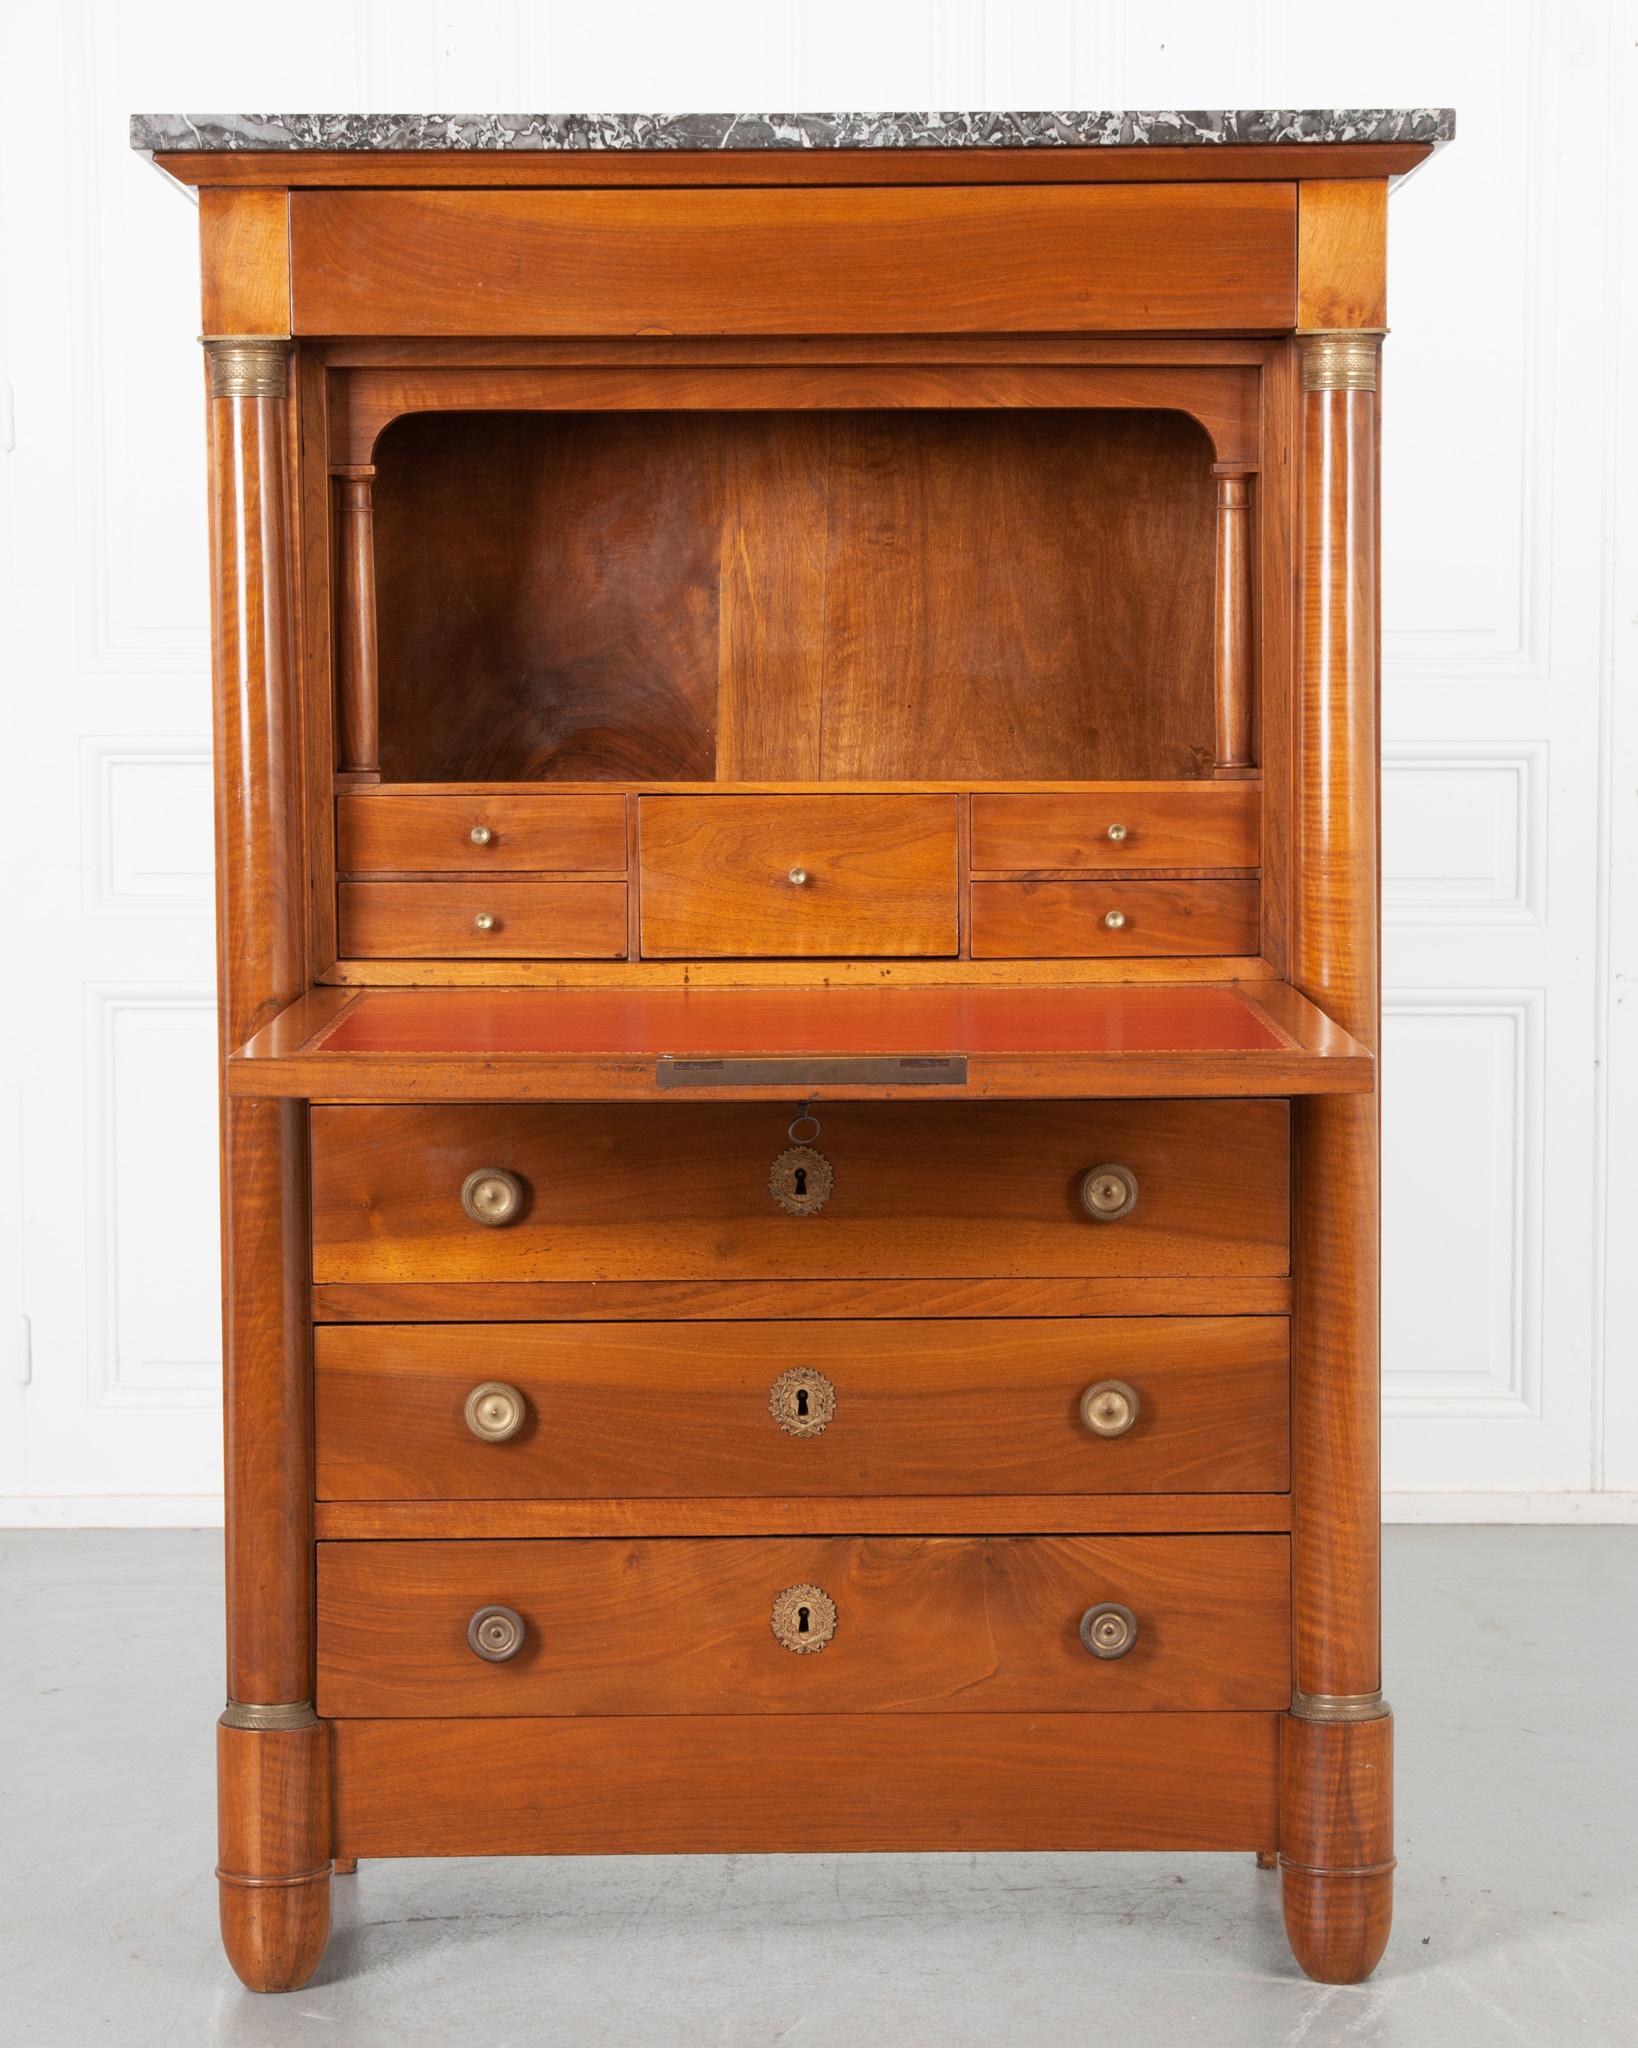 A statley 19th century mahogany secre´taire a` abattant from France, circa 1810. This desk has an exceptional charcoal marble top resting above a single drawer disguised into the apron. Just below the top drawer, the front of the desk folds forward